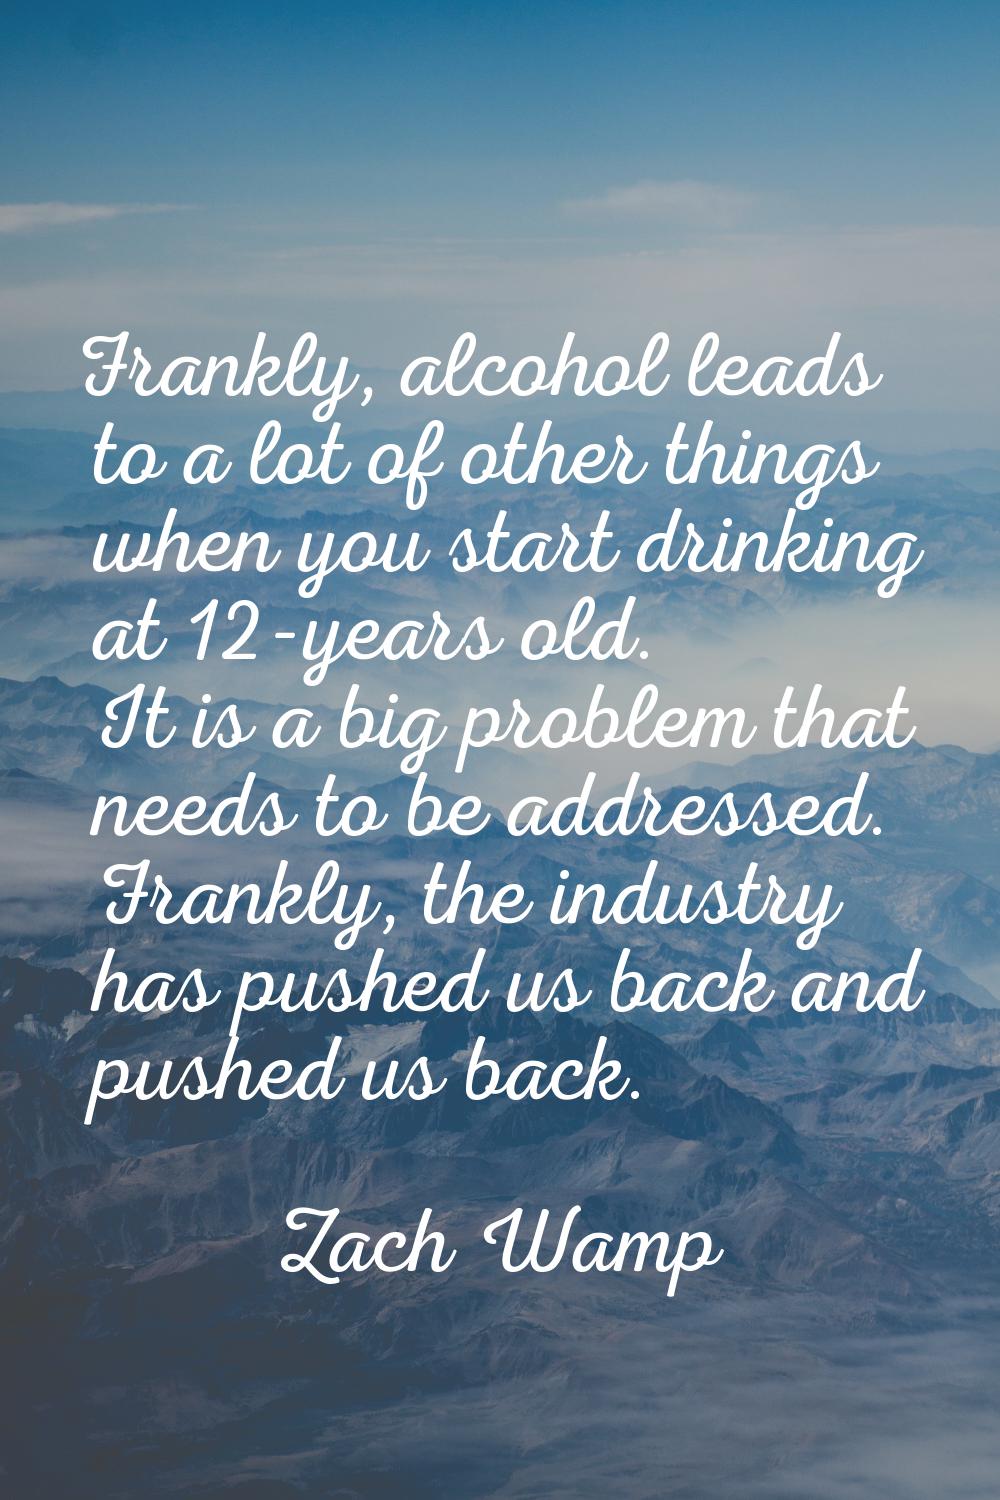 Frankly, alcohol leads to a lot of other things when you start drinking at 12-years old. It is a bi